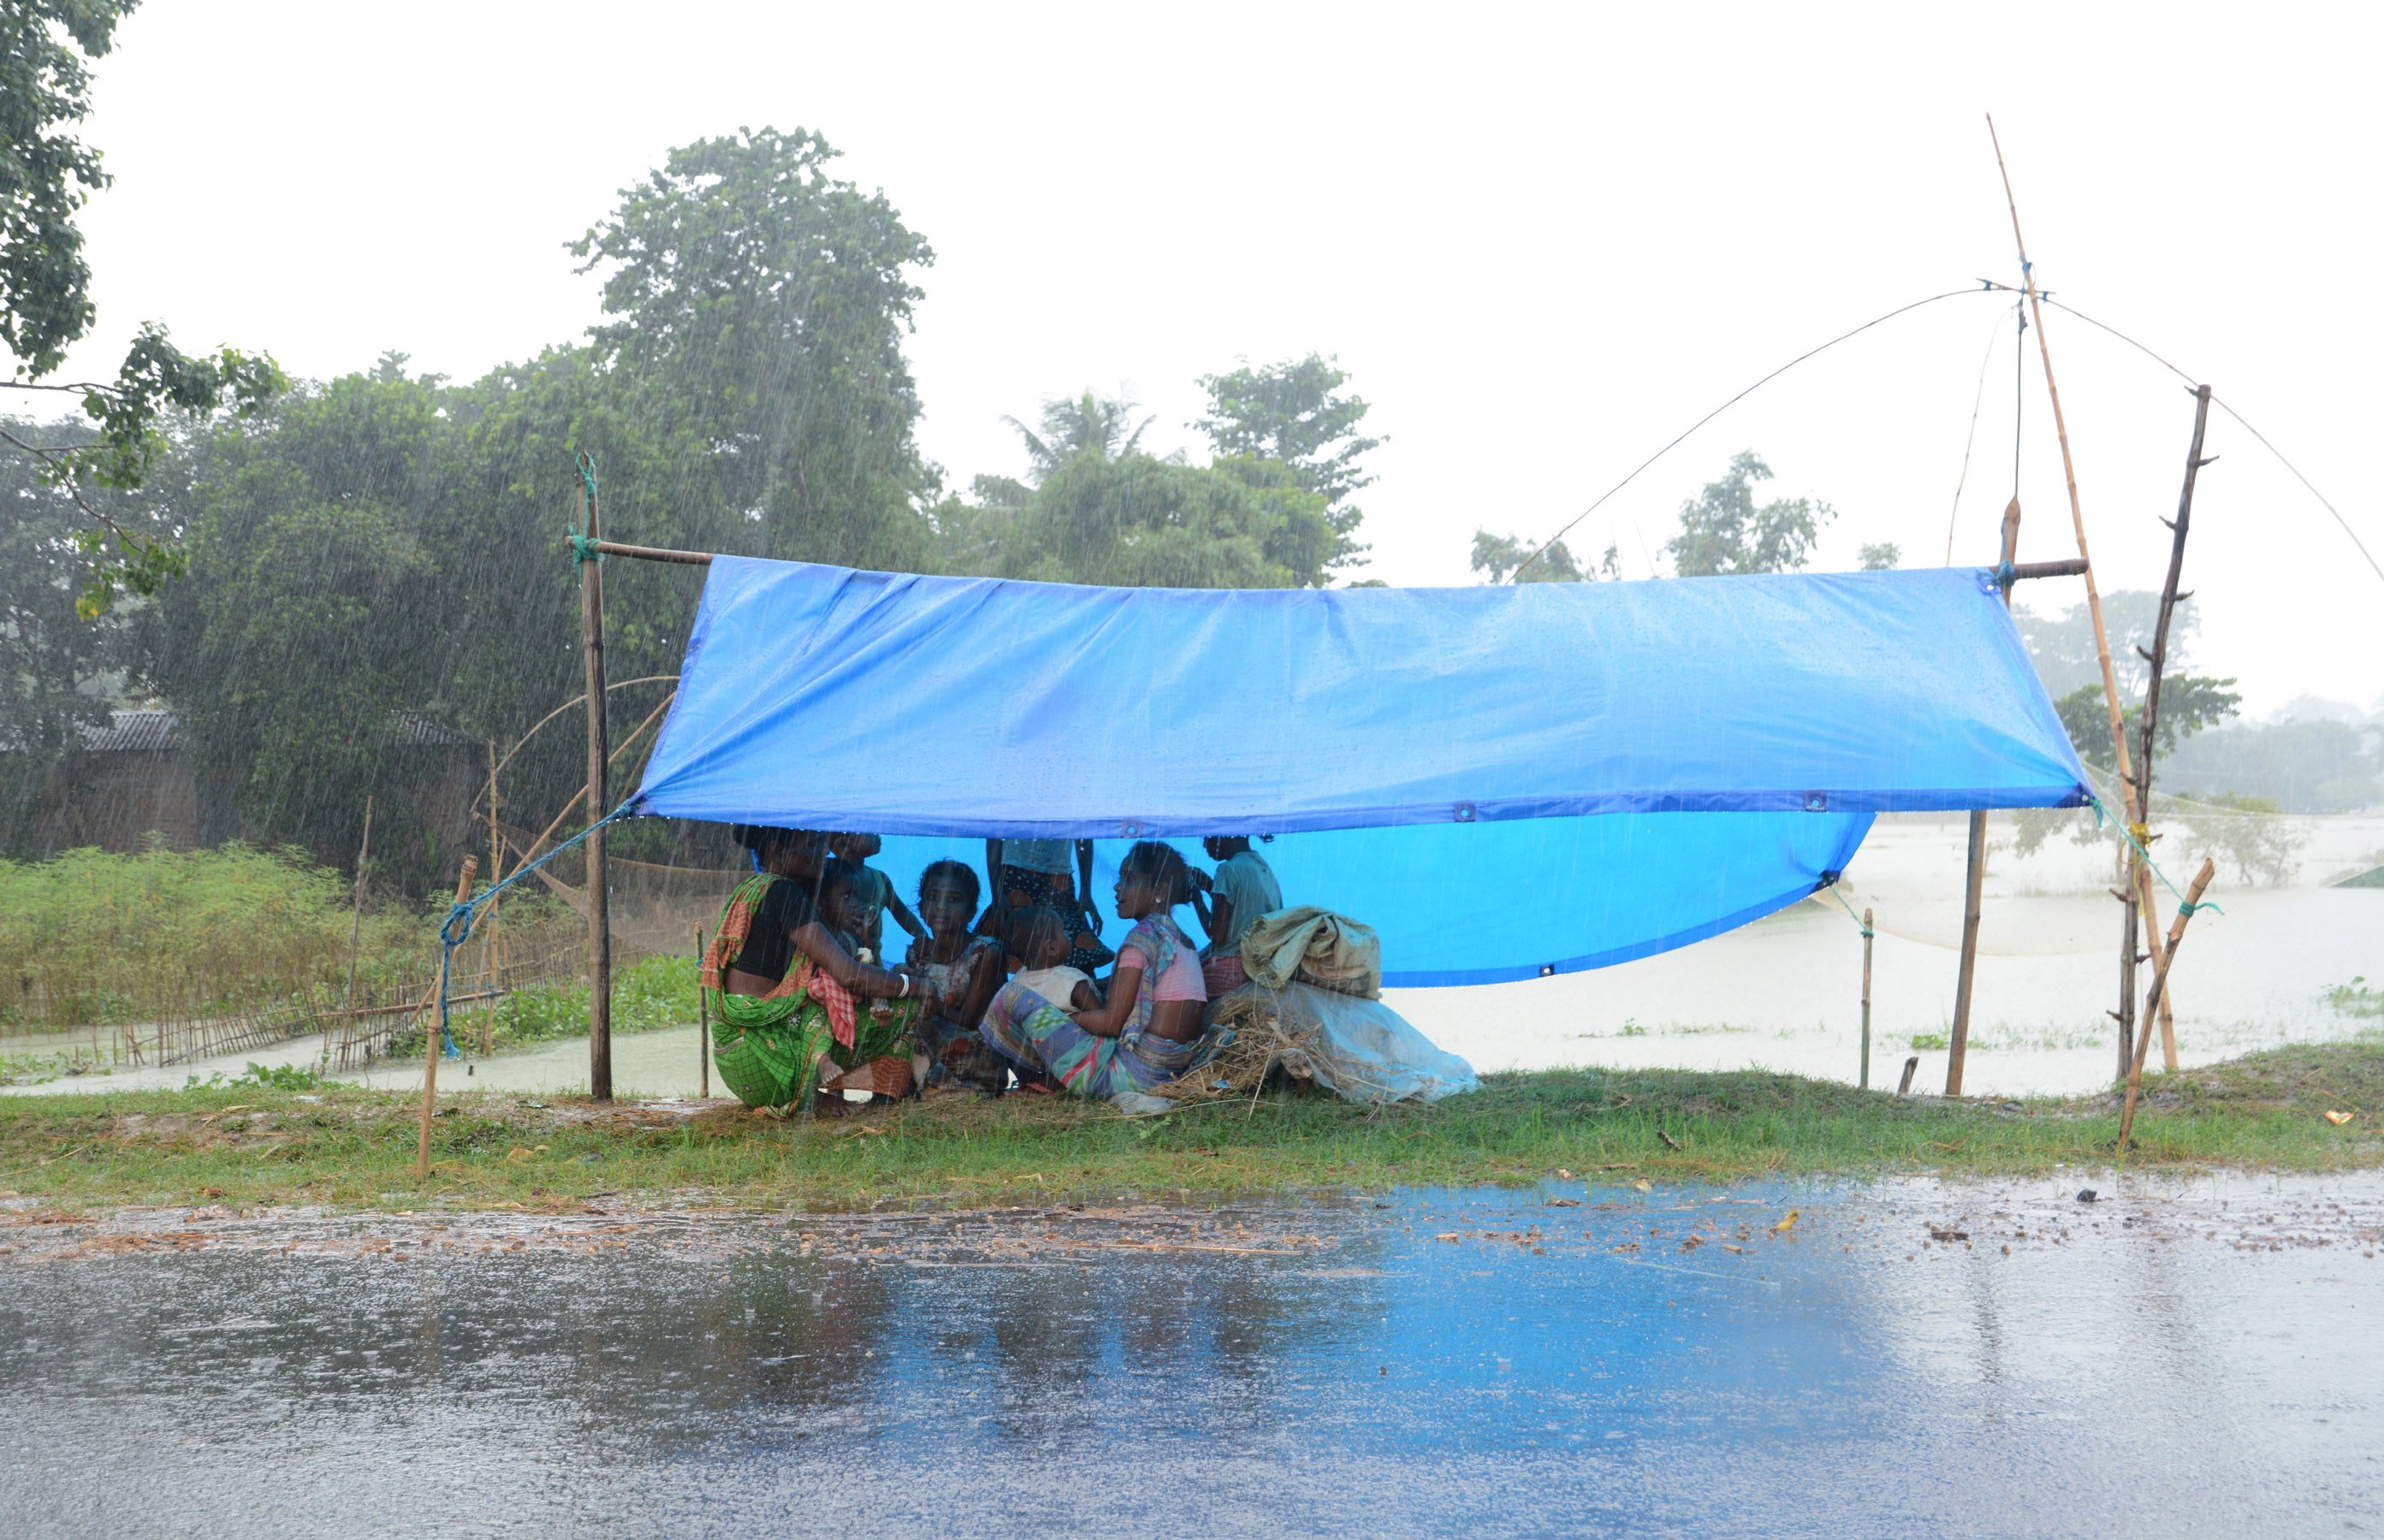 Flood affected villagers sit under a temporary shelter during rainfall in a flood affected area in Morigaon district of Assam